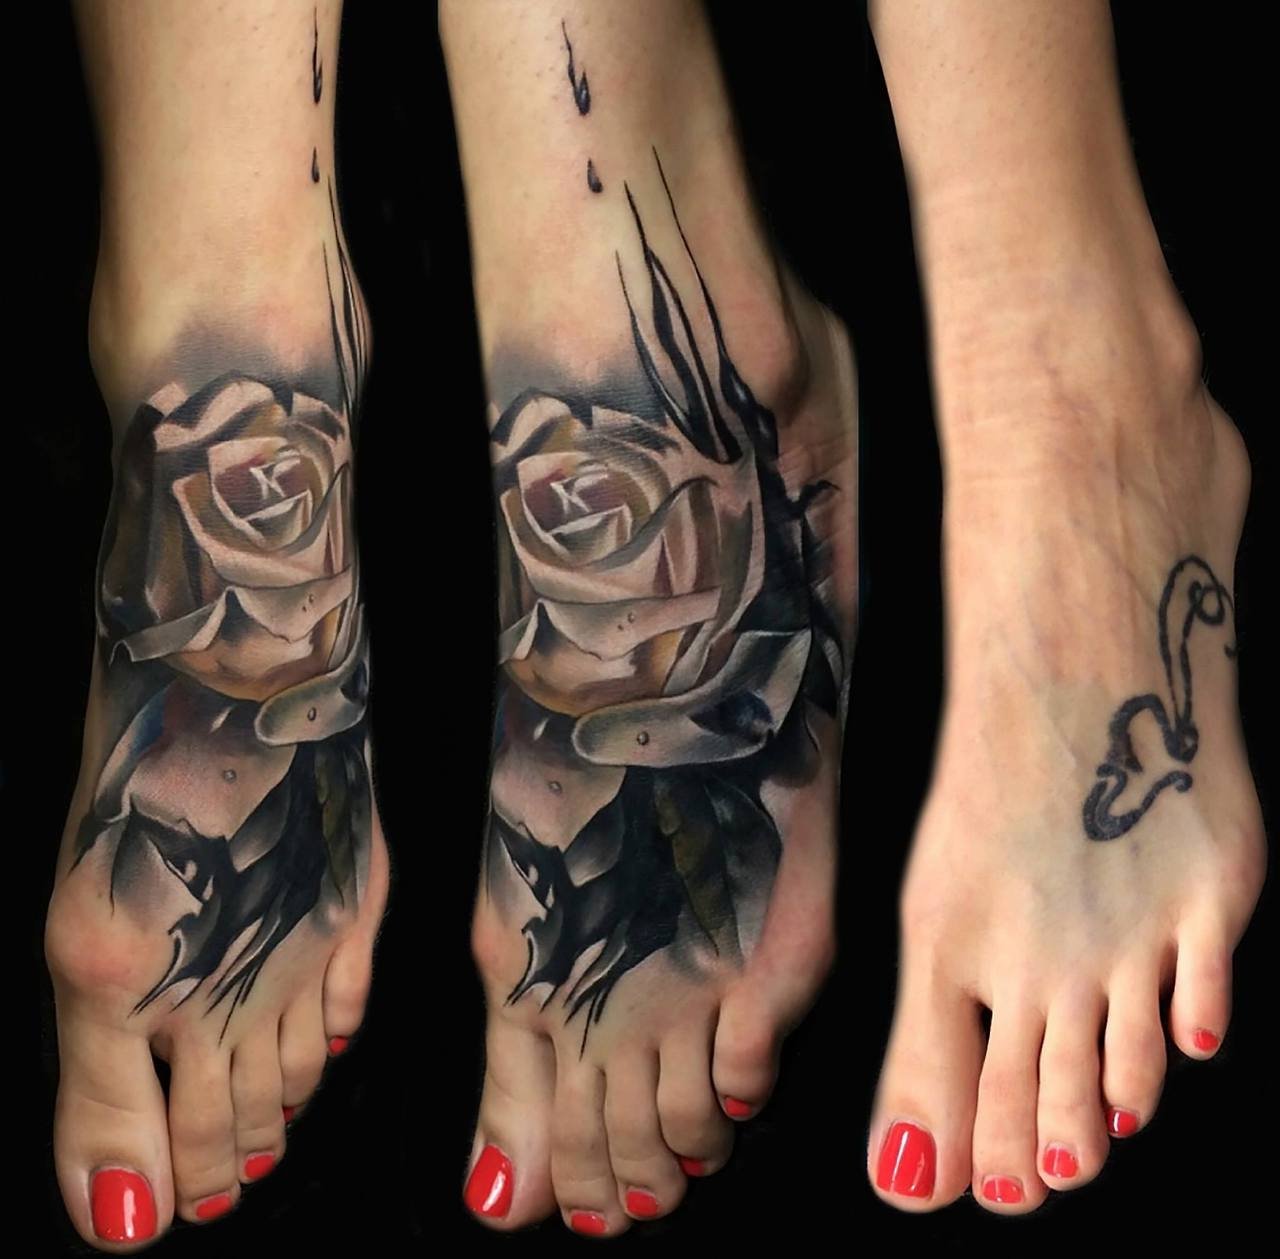 10 Lovely Ideas For Cover Up Tattoos foot rose cover up tattoo design best tattoo ideas gallery 5 2022